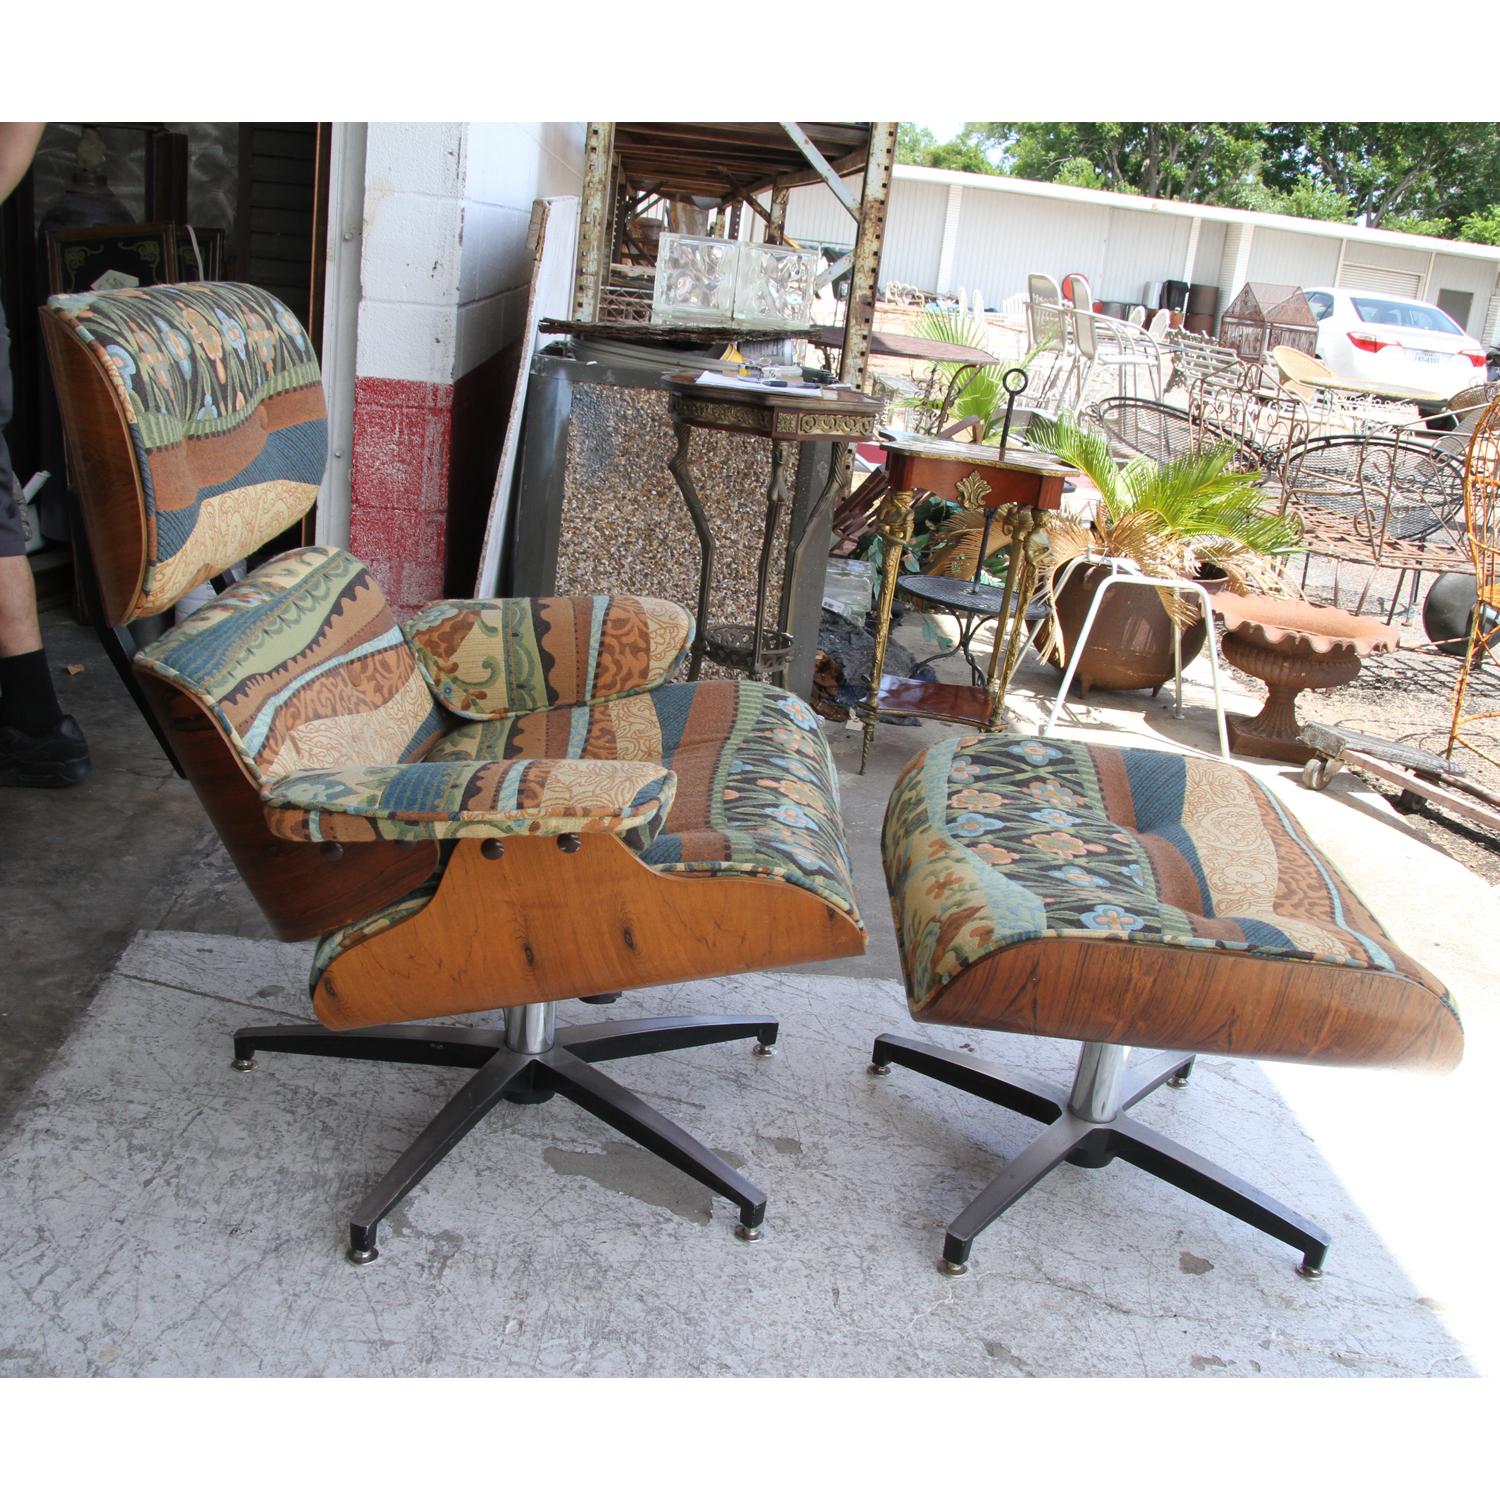 Midcentury lounge chair and ottoman by Cofemo.

Molded plywood and steel on 5 star base. Beautiful burlwood on back of chair. Upholstered in a lively print.

Ottoman: 25